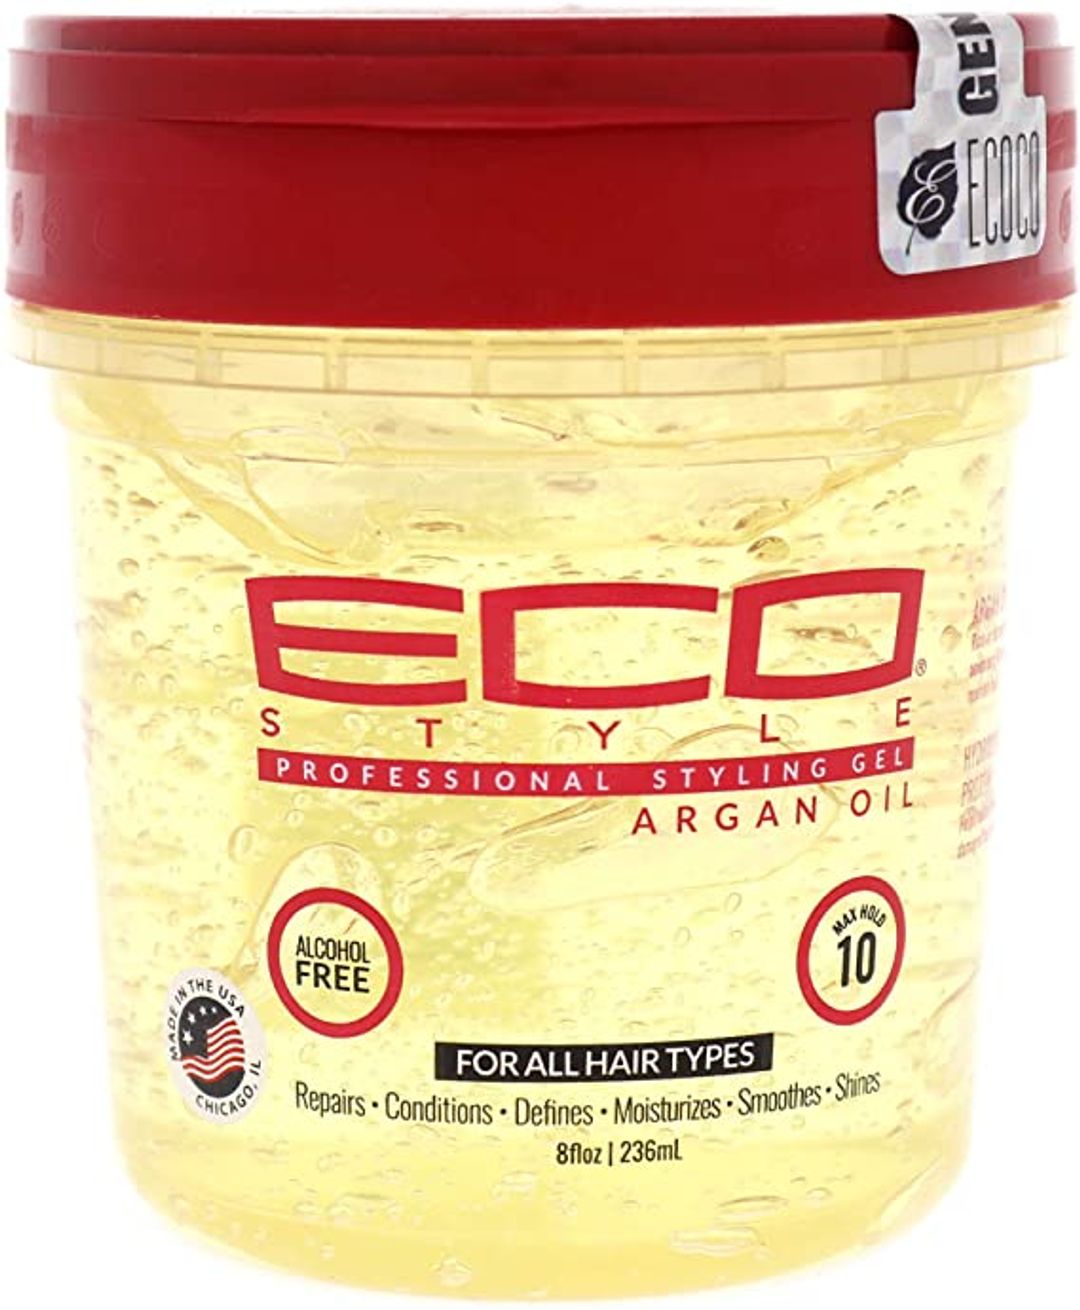 Eco Styler Professional Styling Gel With Argan Oil - 8oz